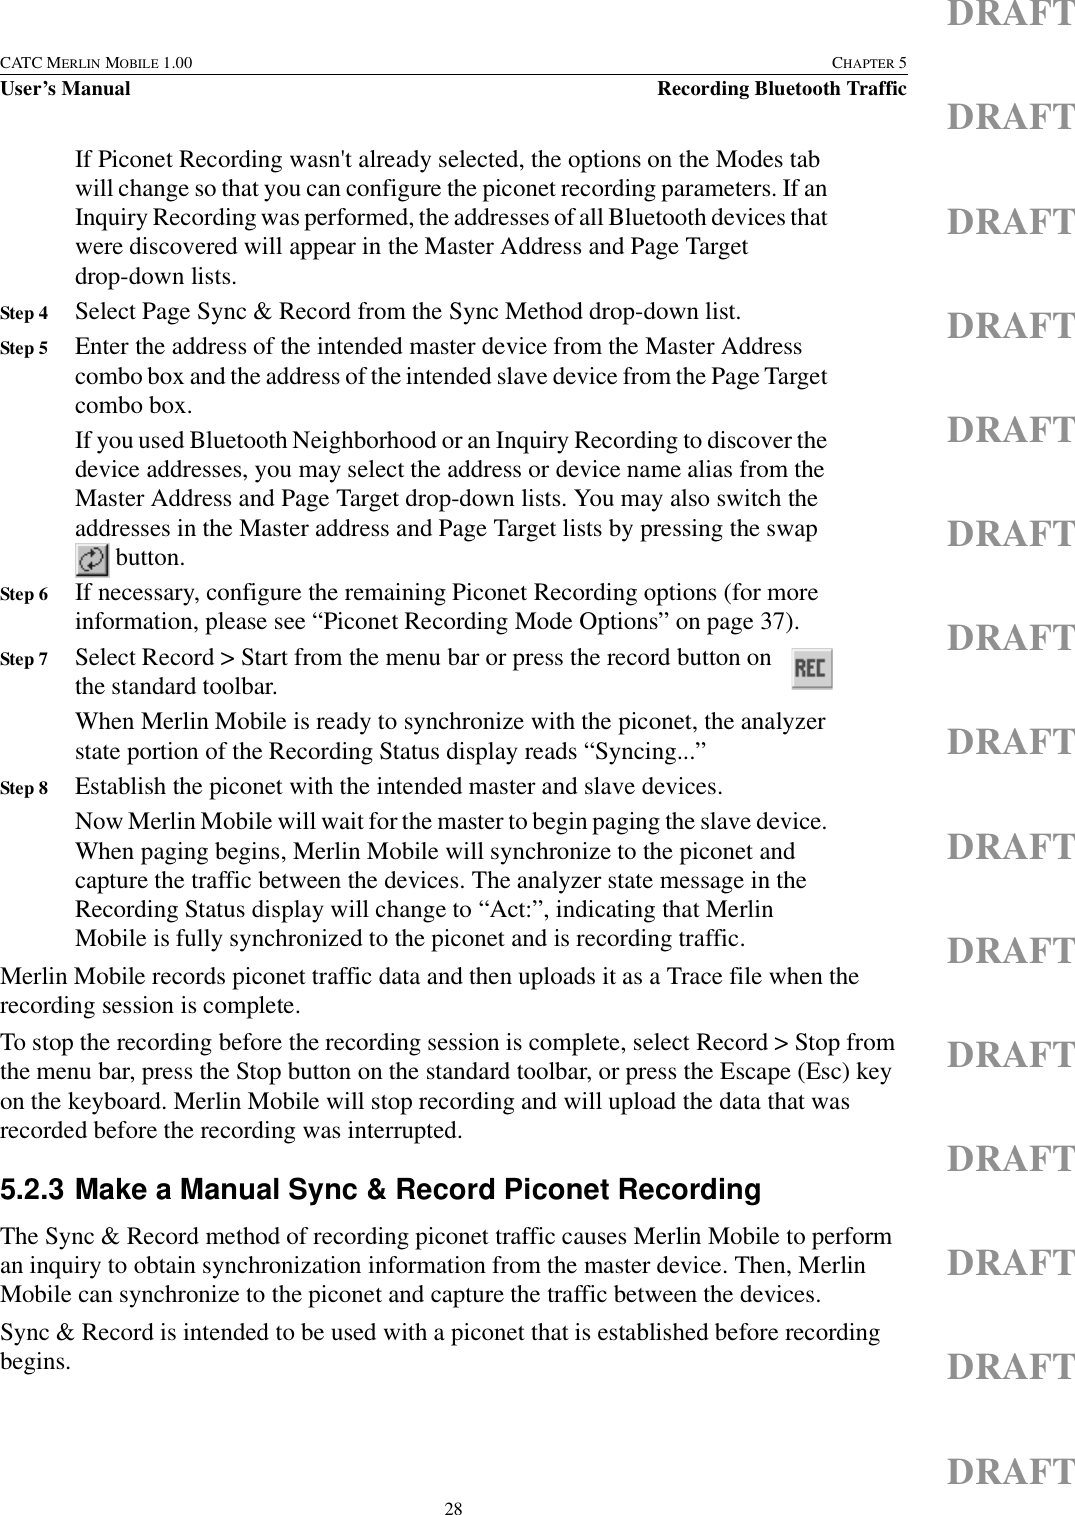 28CATC MERLIN MOBILE 1.00 CHAPTER 5User’s Manual Recording Bluetooth TrafficDRAFTDRAFTDRAFTDRAFTDRAFTDRAFTDRAFTDRAFTDRAFTDRAFTDRAFTDRAFTDRAFTDRAFTDRAFTIf Piconet Recording wasn&apos;t already selected, the options on the Modes tab will change so that you can configure the piconet recording parameters. If an Inquiry Recording was performed, the addresses of all Bluetooth devices that were discovered will appear in the Master Address and Page Target drop-down lists.Step 4 Select Page Sync &amp; Record from the Sync Method drop-down list.Step 5 Enter the address of the intended master device from the Master Address combo box and the address of the intended slave device from the Page Target combo box.If you used Bluetooth Neighborhood or an Inquiry Recording to discover the device addresses, you may select the address or device name alias from the Master Address and Page Target drop-down lists. You may also switch the addresses in the Master address and Page Target lists by pressing the swap  button. Step 6 If necessary, configure the remaining Piconet Recording options (for more information, please see “Piconet Recording Mode Options” on page 37).Step 7 Select Record &gt; Start from the menu bar or press the record button on the standard toolbar. When Merlin Mobile is ready to synchronize with the piconet, the analyzer state portion of the Recording Status display reads “Syncing...”Step 8 Establish the piconet with the intended master and slave devices.Now Merlin Mobile will wait for the master to begin paging the slave device. When paging begins, Merlin Mobile will synchronize to the piconet and capture the traffic between the devices. The analyzer state message in the Recording Status display will change to “Act:”, indicating that Merlin Mobile is fully synchronized to the piconet and is recording traffic.Merlin Mobile records piconet traffic data and then uploads it as a Trace file when the recording session is complete.To stop the recording before the recording session is complete, select Record &gt; Stop from the menu bar, press the Stop button on the standard toolbar, or press the Escape (Esc) key on the keyboard. Merlin Mobile will stop recording and will upload the data that was recorded before the recording was interrupted.5.2.3 Make a Manual Sync &amp; Record Piconet RecordingThe Sync &amp; Record method of recording piconet traffic causes Merlin Mobile to perform an inquiry to obtain synchronization information from the master device. Then, Merlin Mobile can synchronize to the piconet and capture the traffic between the devices.Sync &amp; Record is intended to be used with a piconet that is established before recording begins.